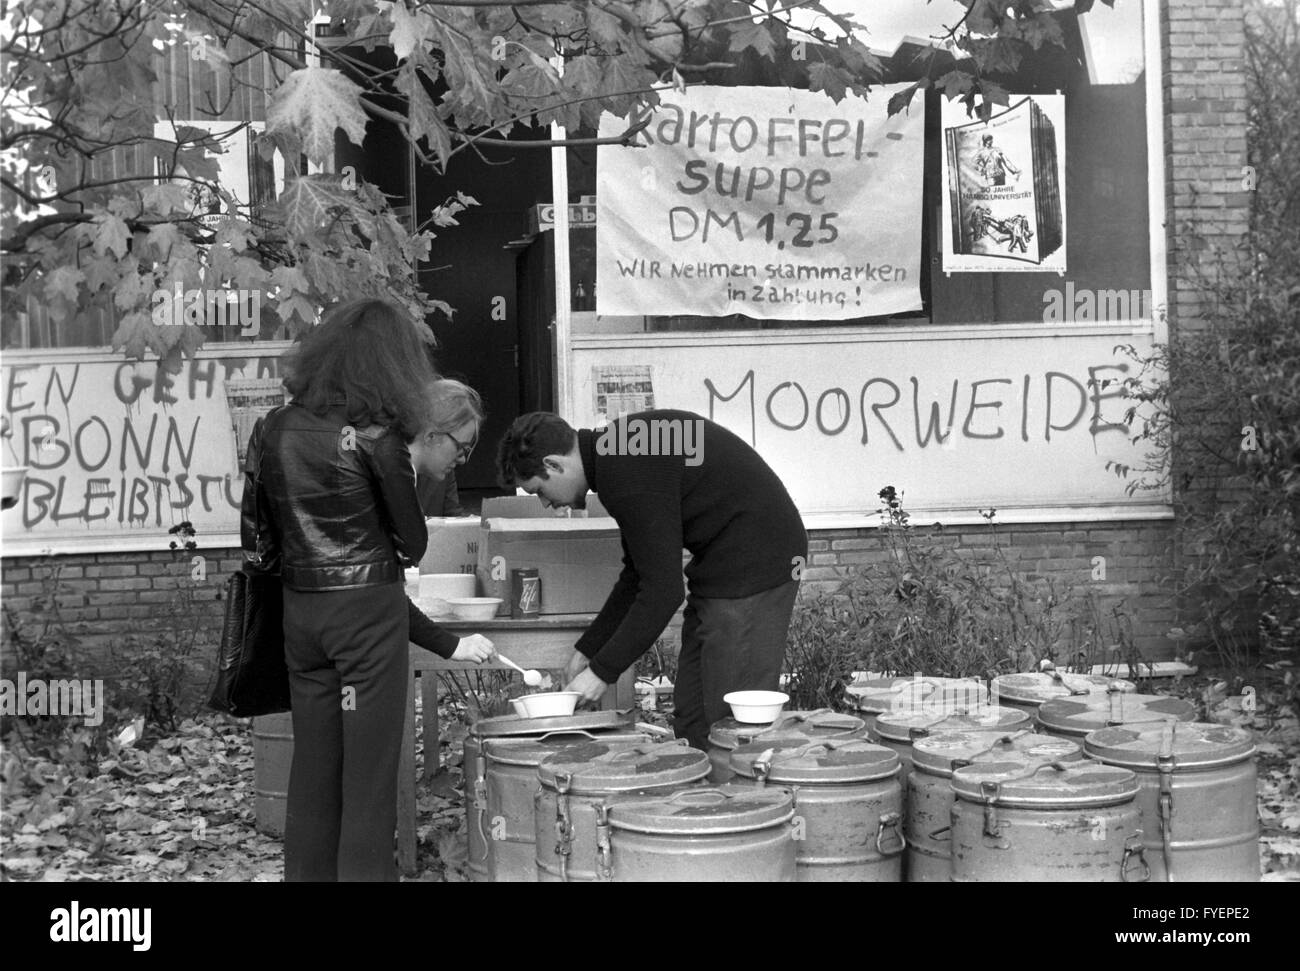 A commercial kitchen delivers soup for 1.25 Mark to students of Hamburg, who eat the soup on campus. Students of Hamburg boycott the canteens of the University of Hamburg and the University of Graphic Arts since 17 October 1969. Stock Photo